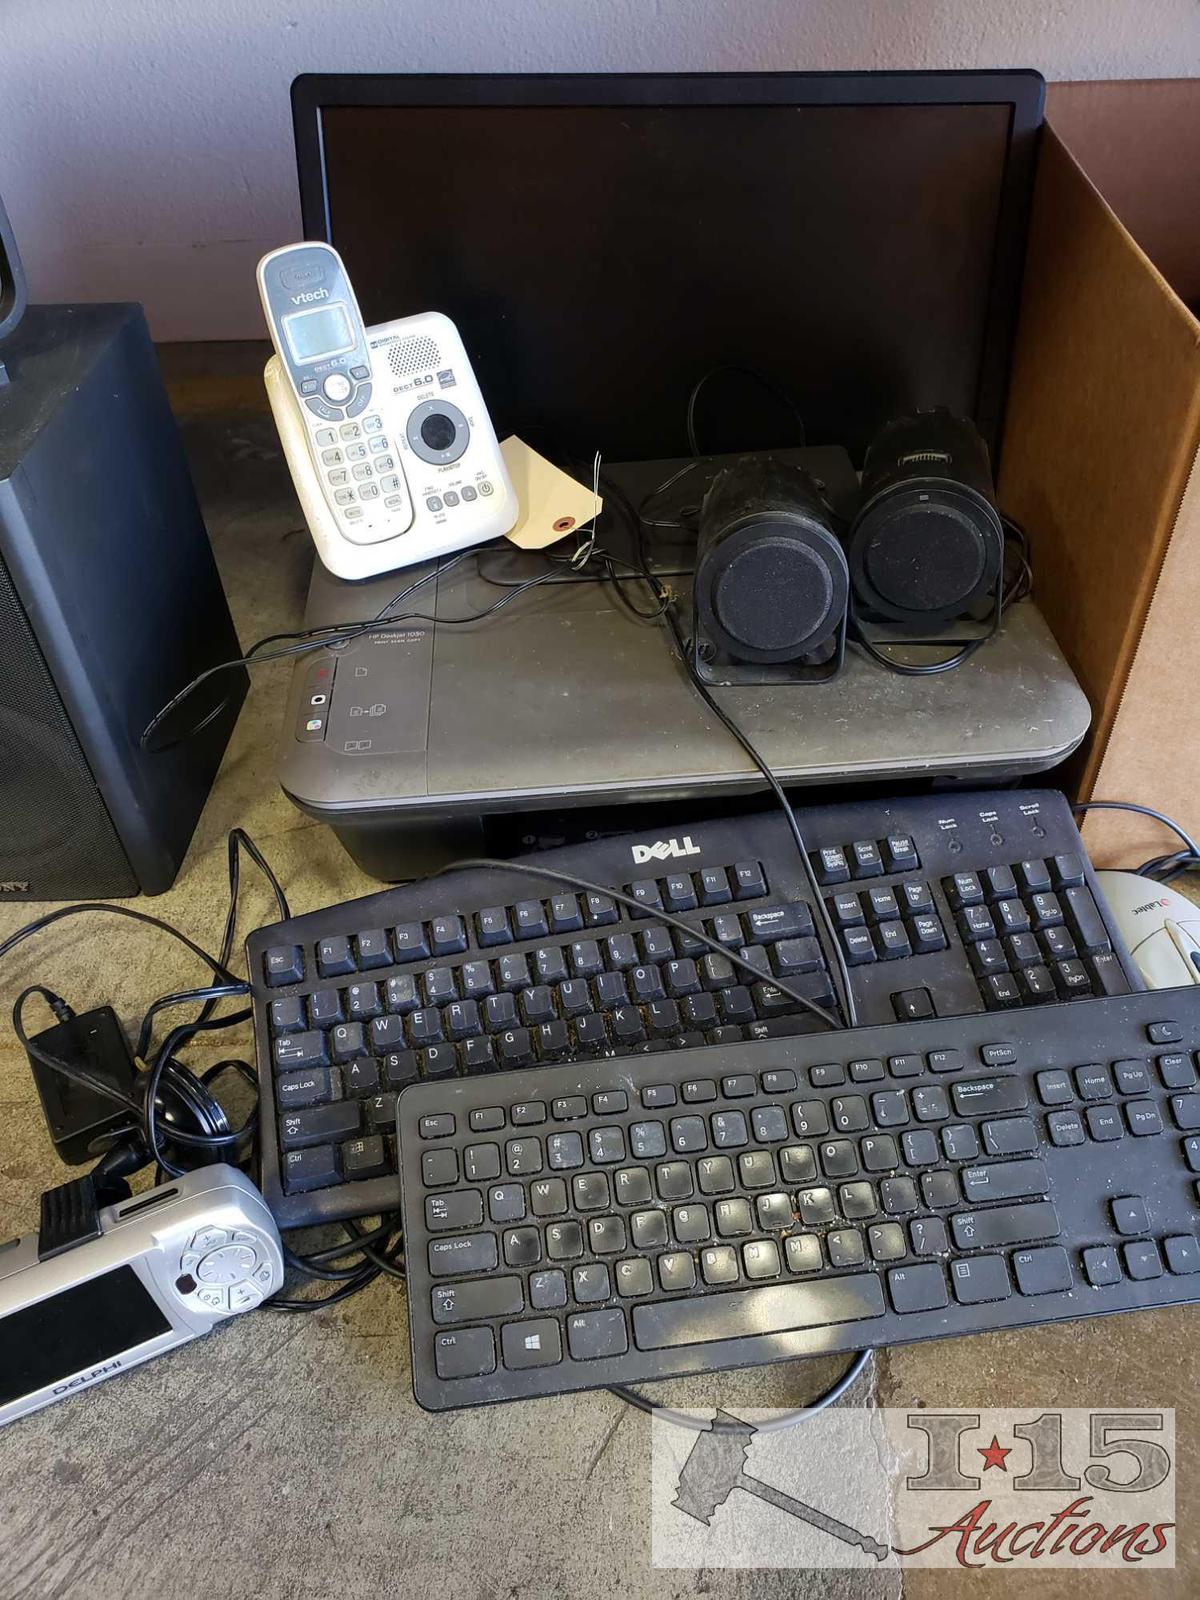 2 Dell Keyboards, HP Printer, Dell Monitor, Altec Speakers and More